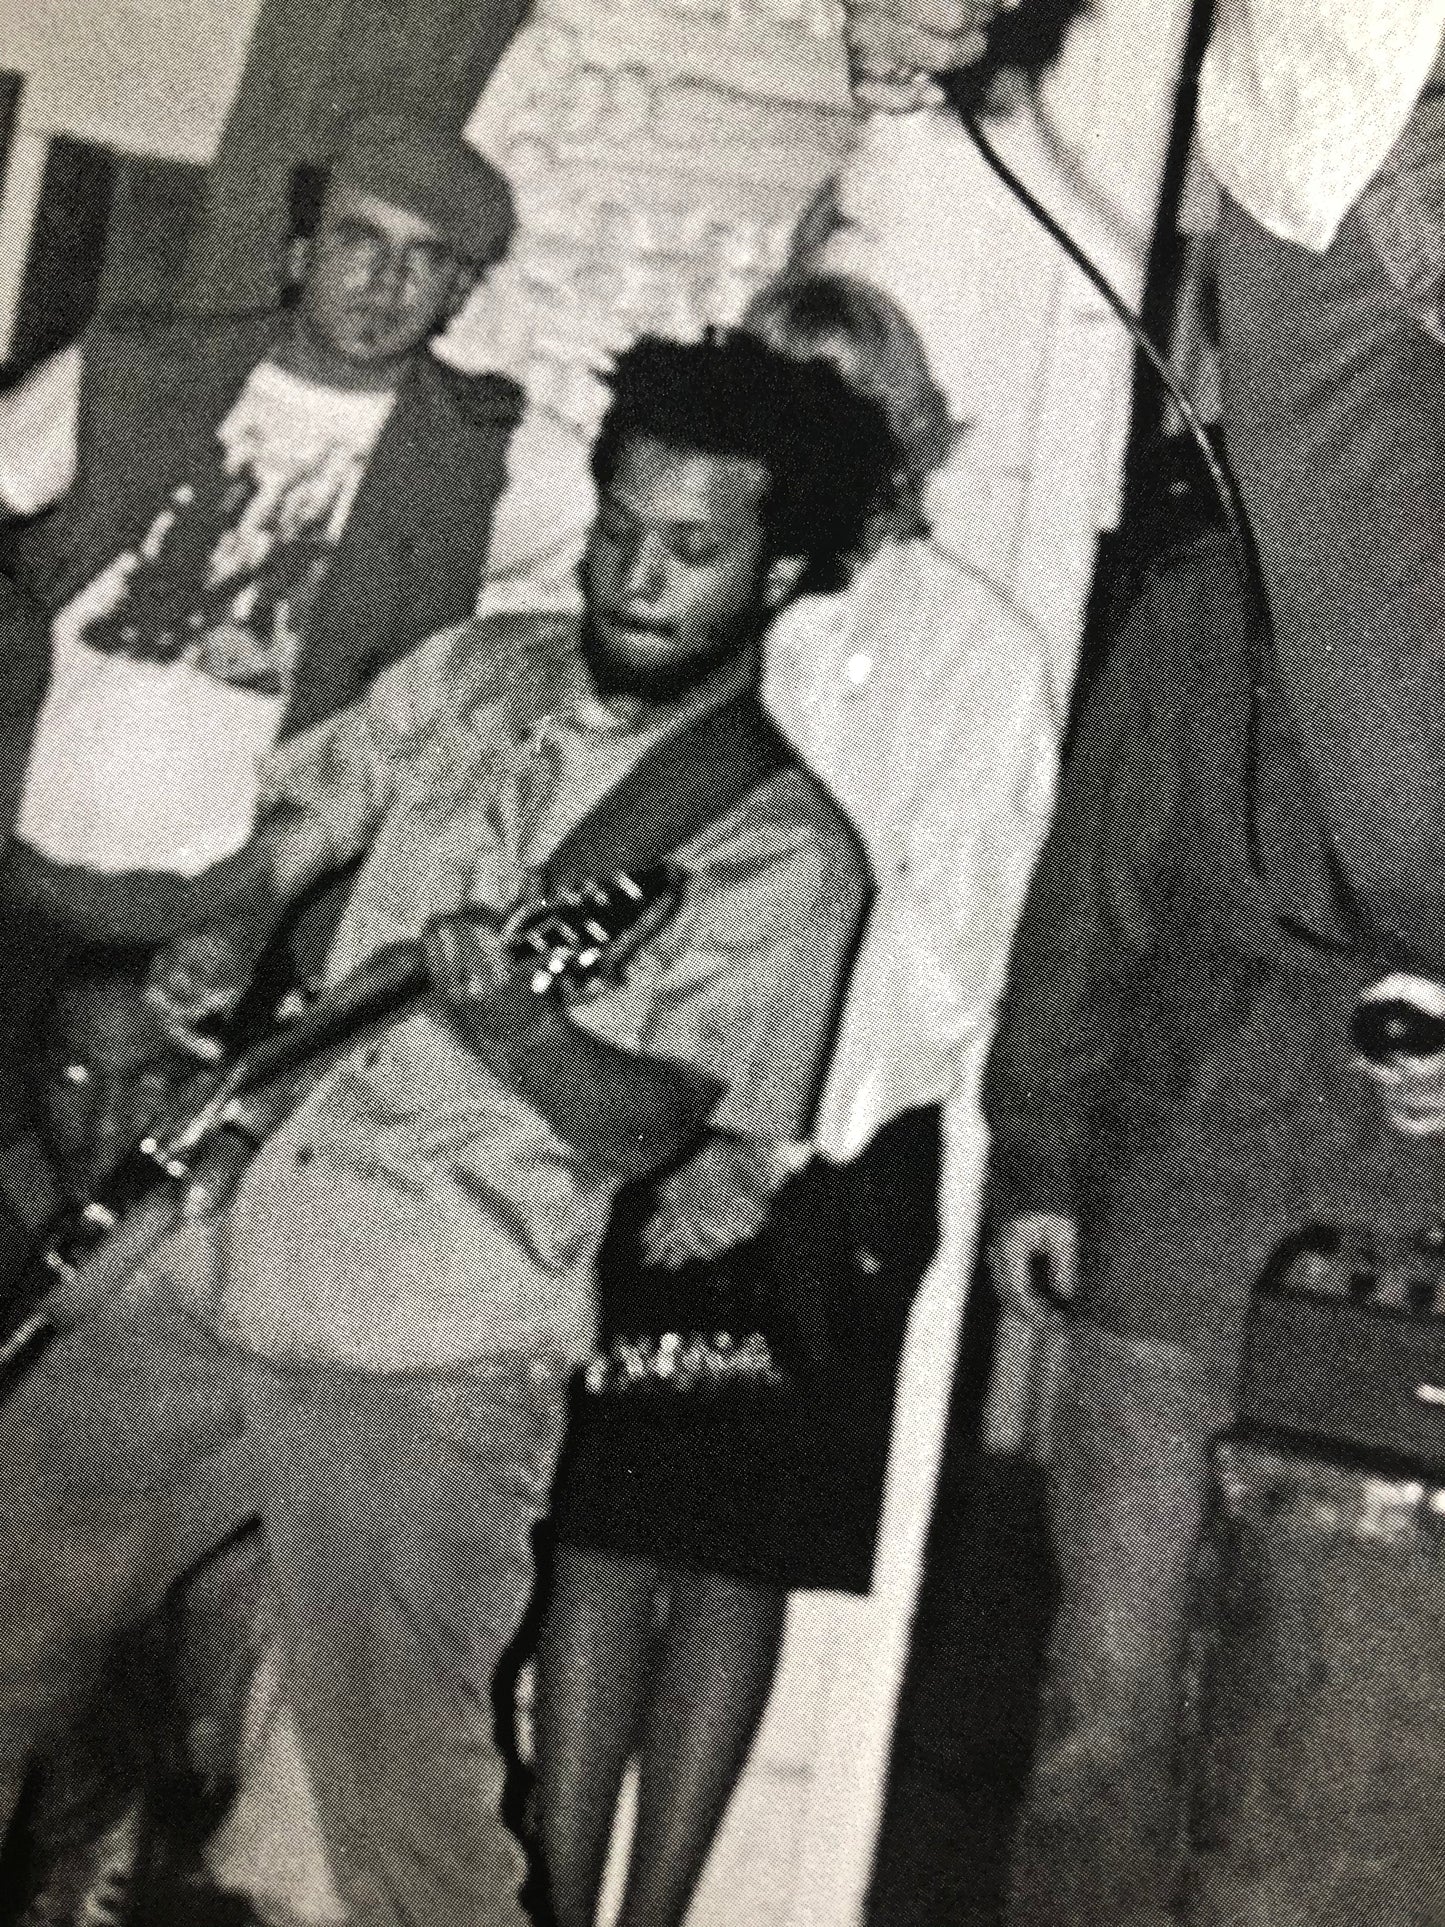 Edward Colver "HR and Dr Know of Bad Brains" (1982)